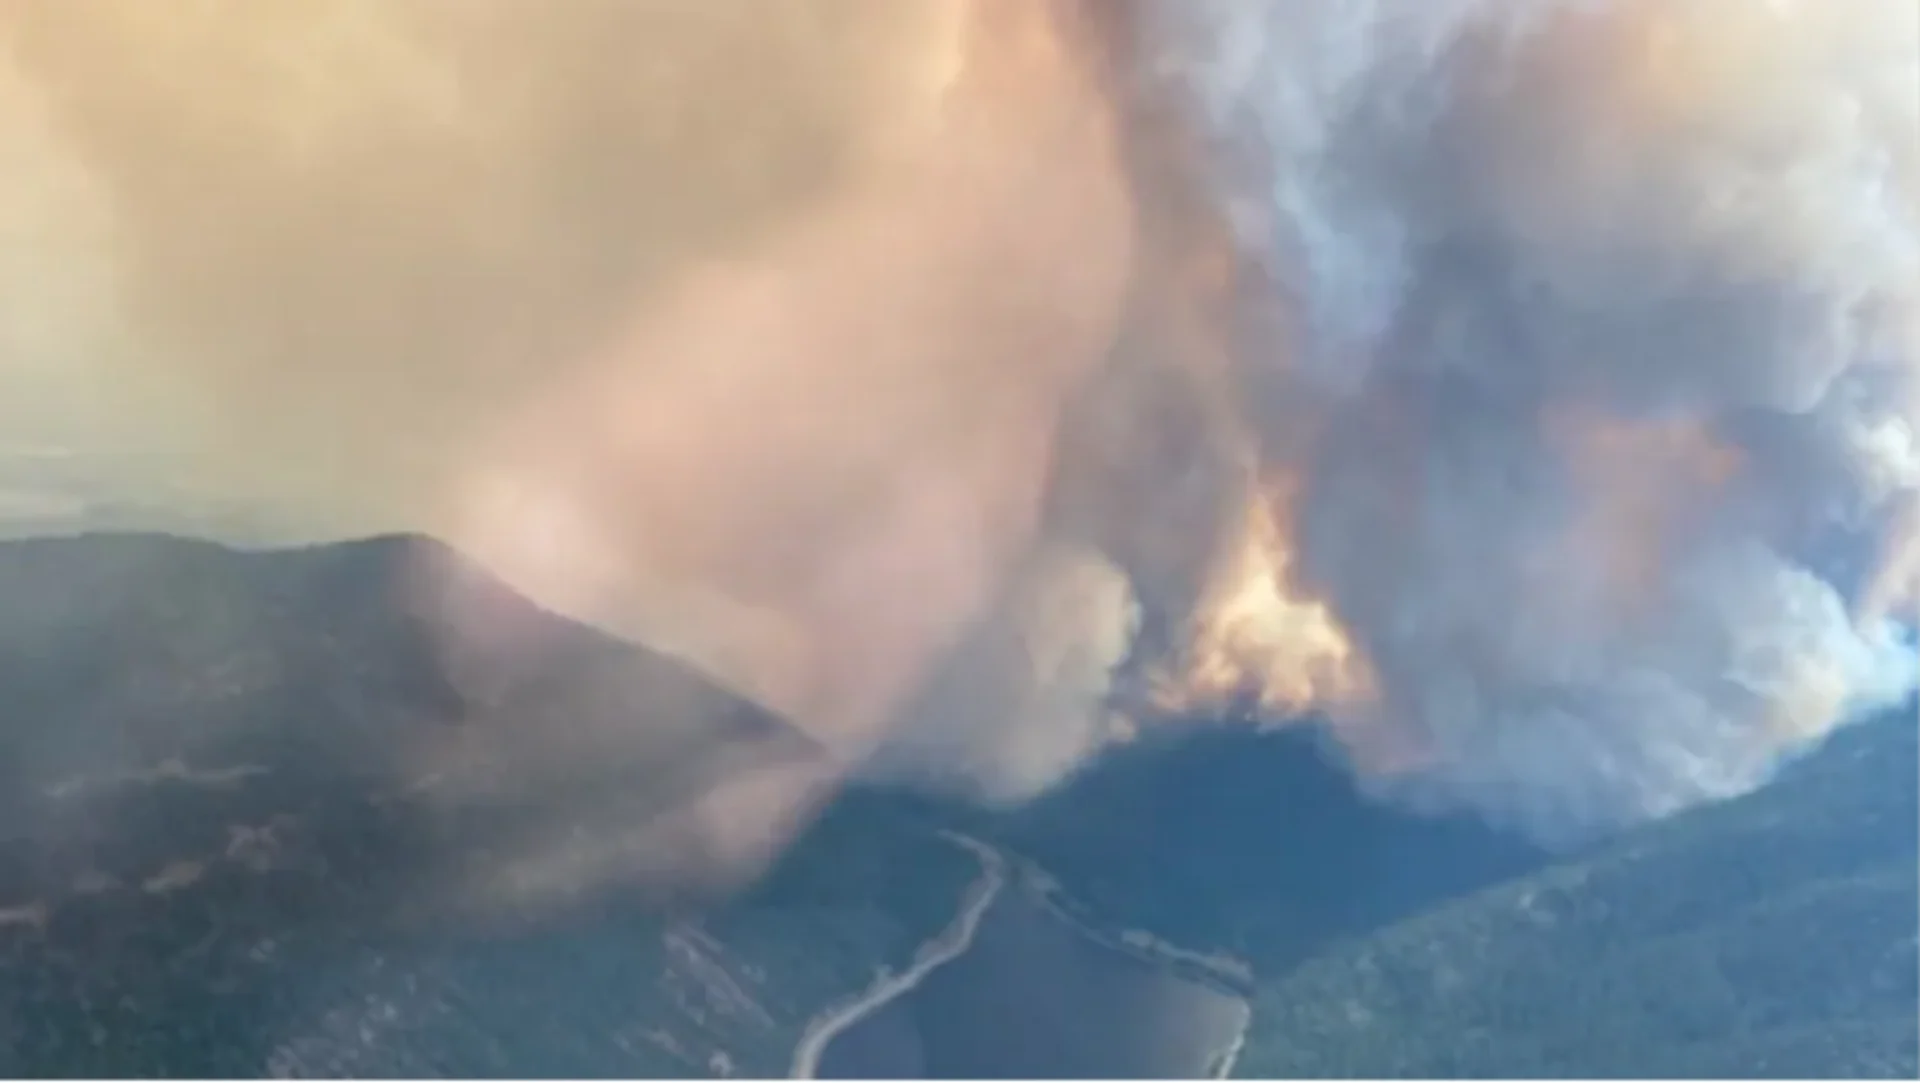 BC WILDFIRE SERVICE: The White Rock Lake wildfire, burning northwest of Vernon, B.C., is one of the largest of almost 300 fires burning across the province. (B.C. Wildfire Service)